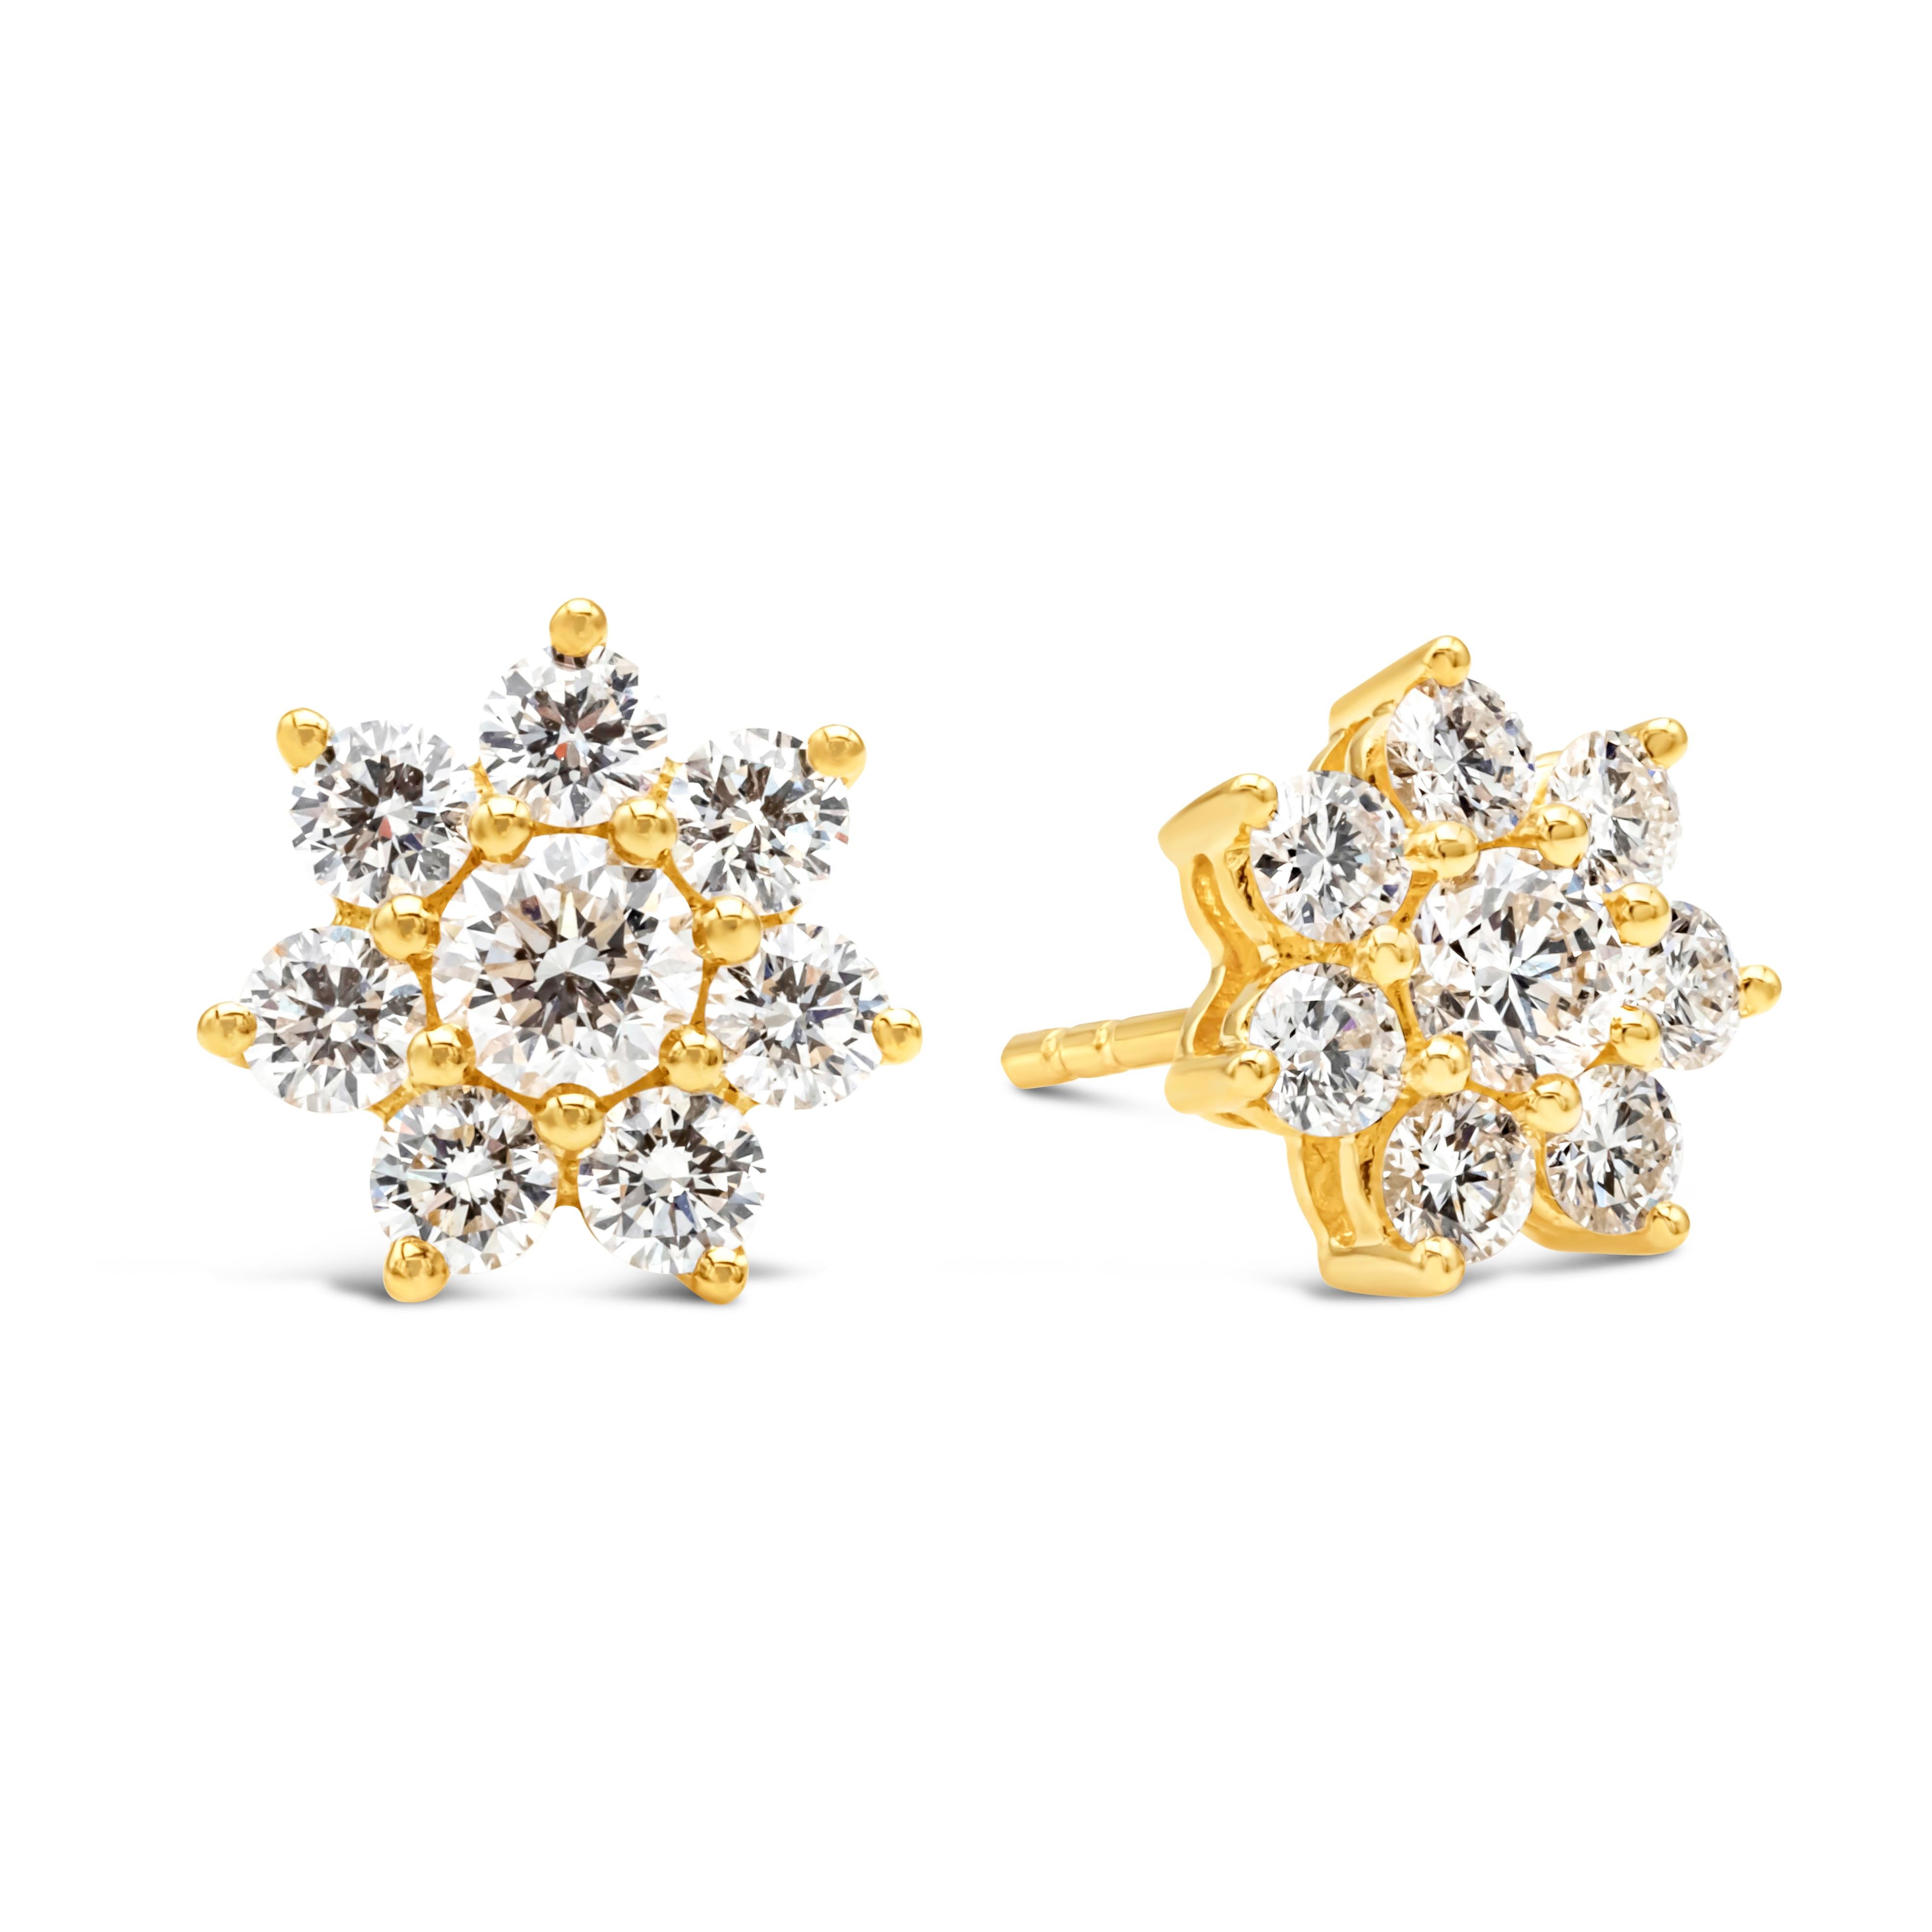 A chic and unique pair of stud earrings showcasing 16 brilliant round shape diamonds weighing 1.35 carats total, F color and VS in clarity, beautifully set in a flower-motif design and shared prong setting. Finely made in 18k yellow gold. A perfect